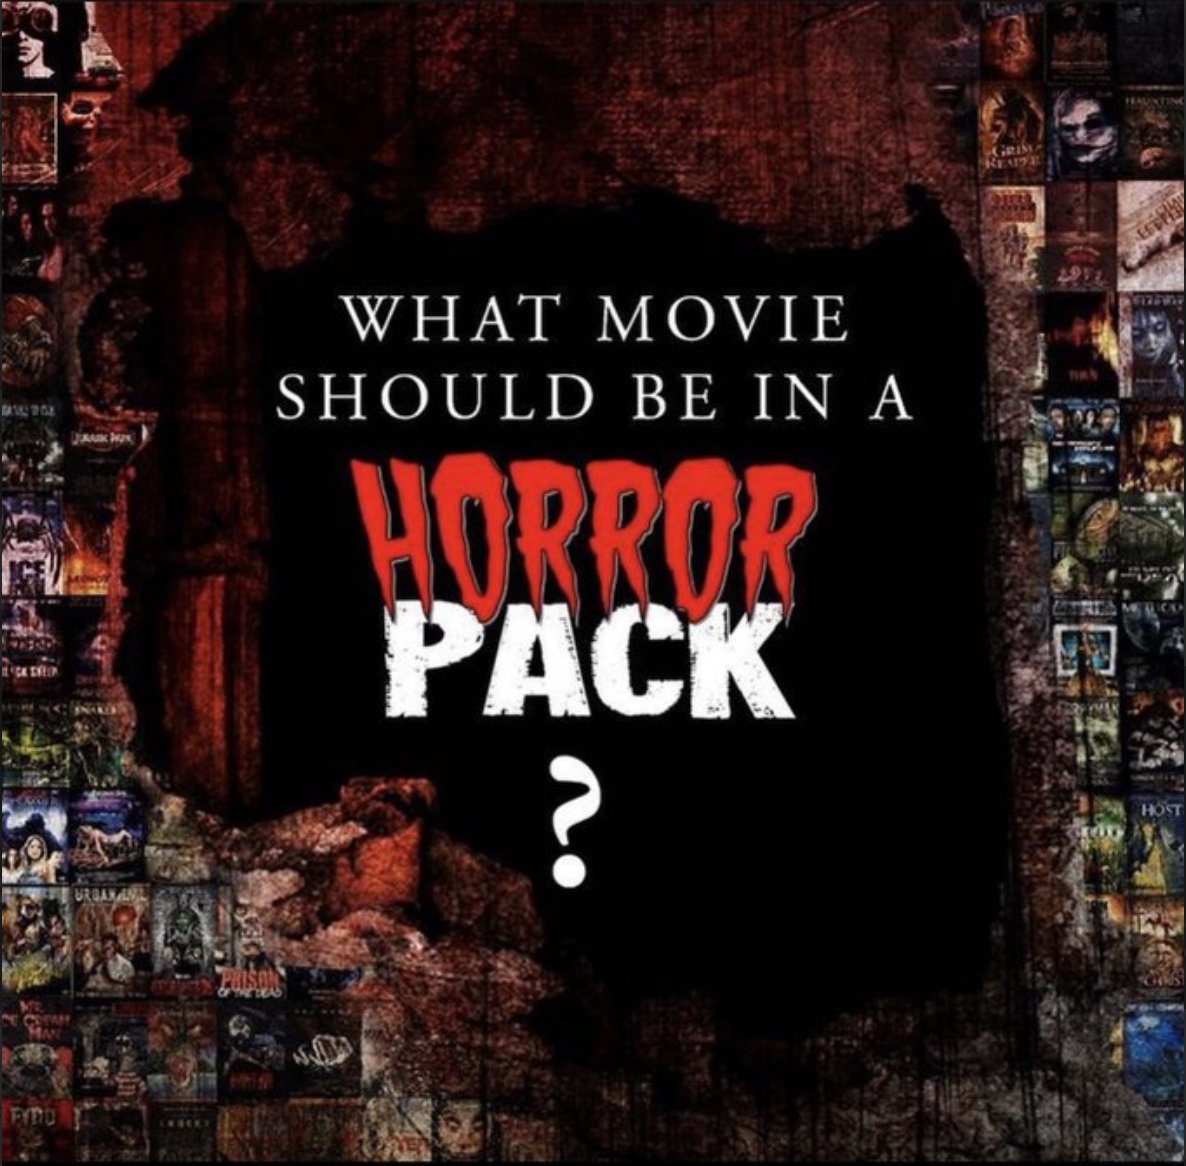 What movie should be in a HorrorPack??